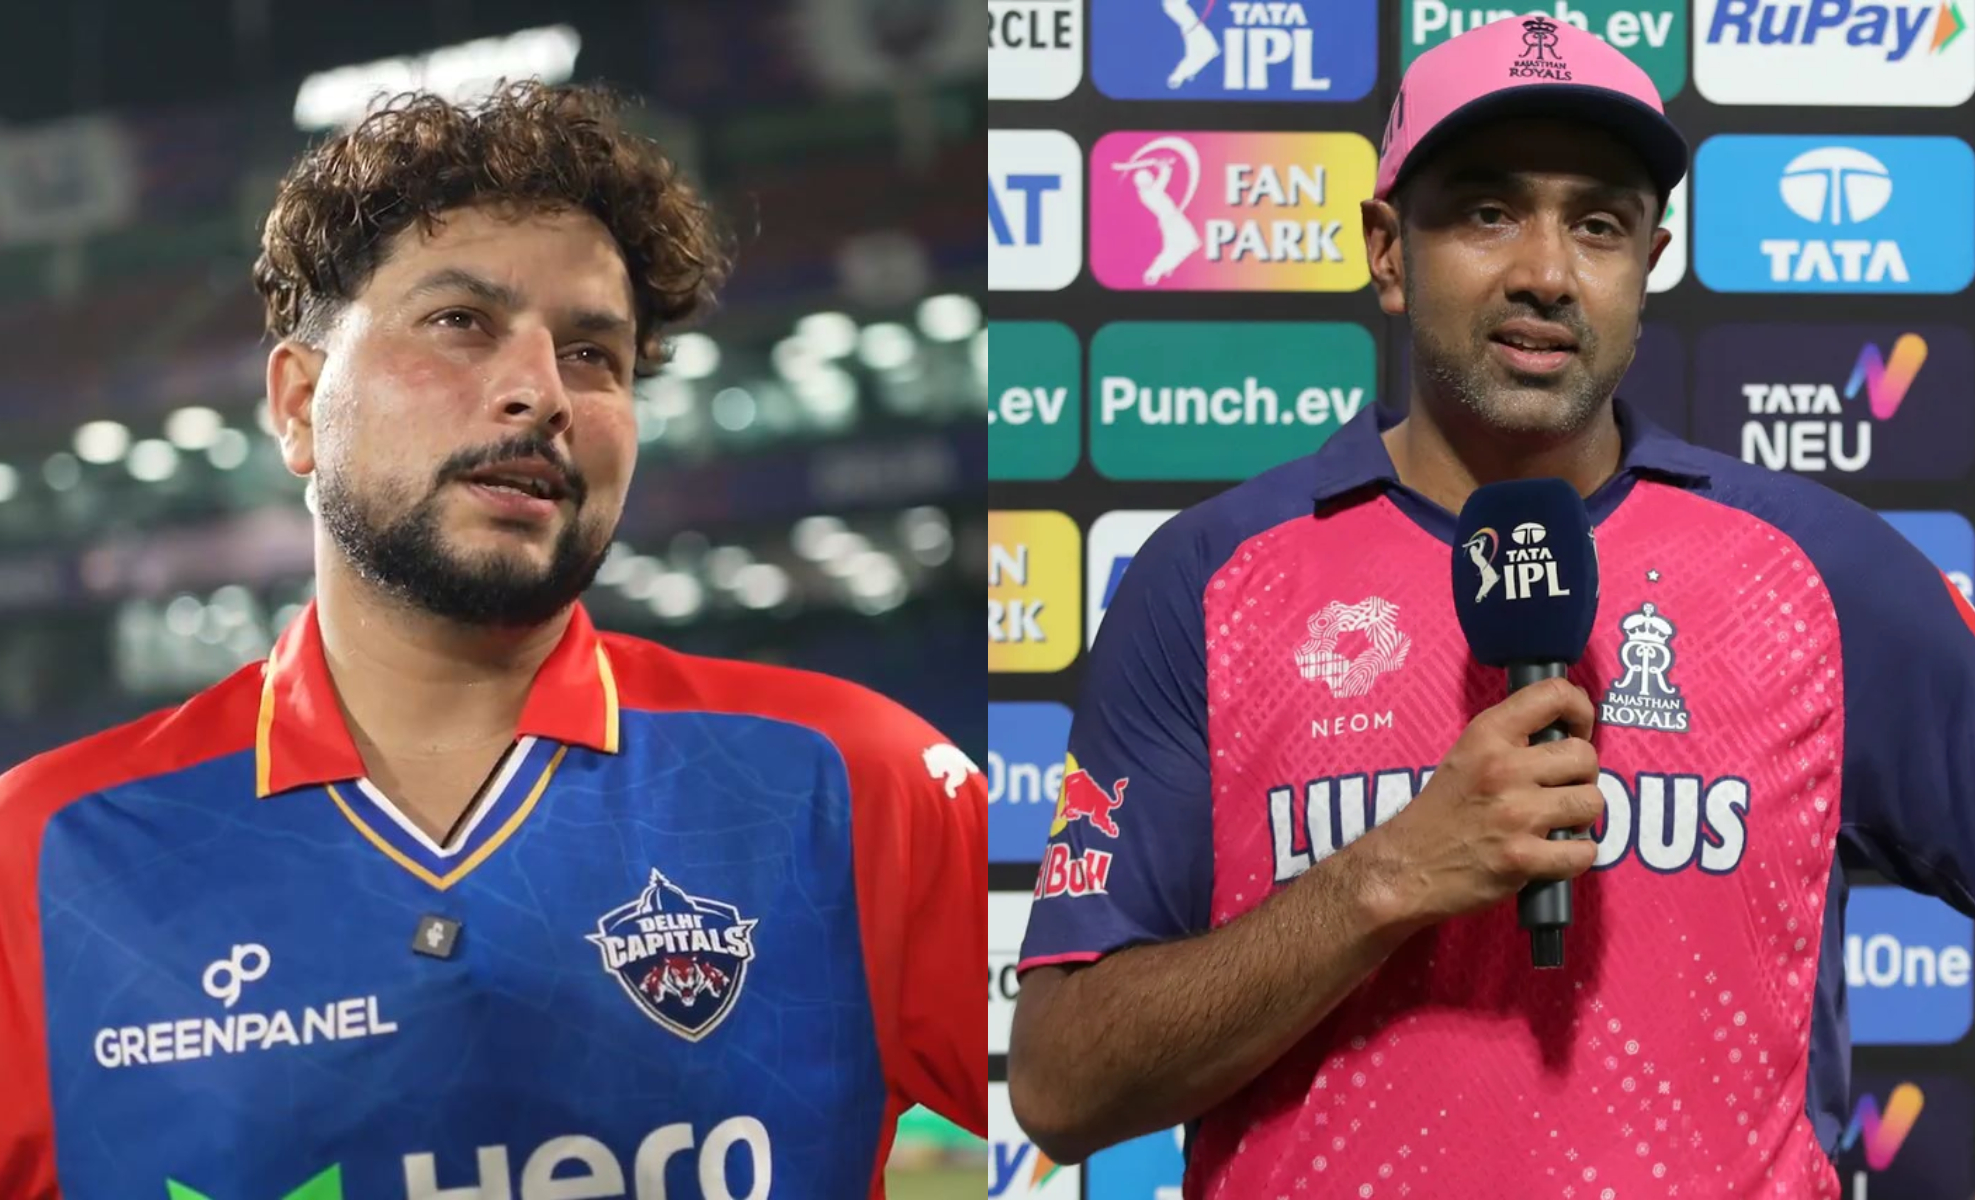 Kuldeep picked 2/25 in DC's win, while Ashwin took 3/24 for RR | IPL-BCCI